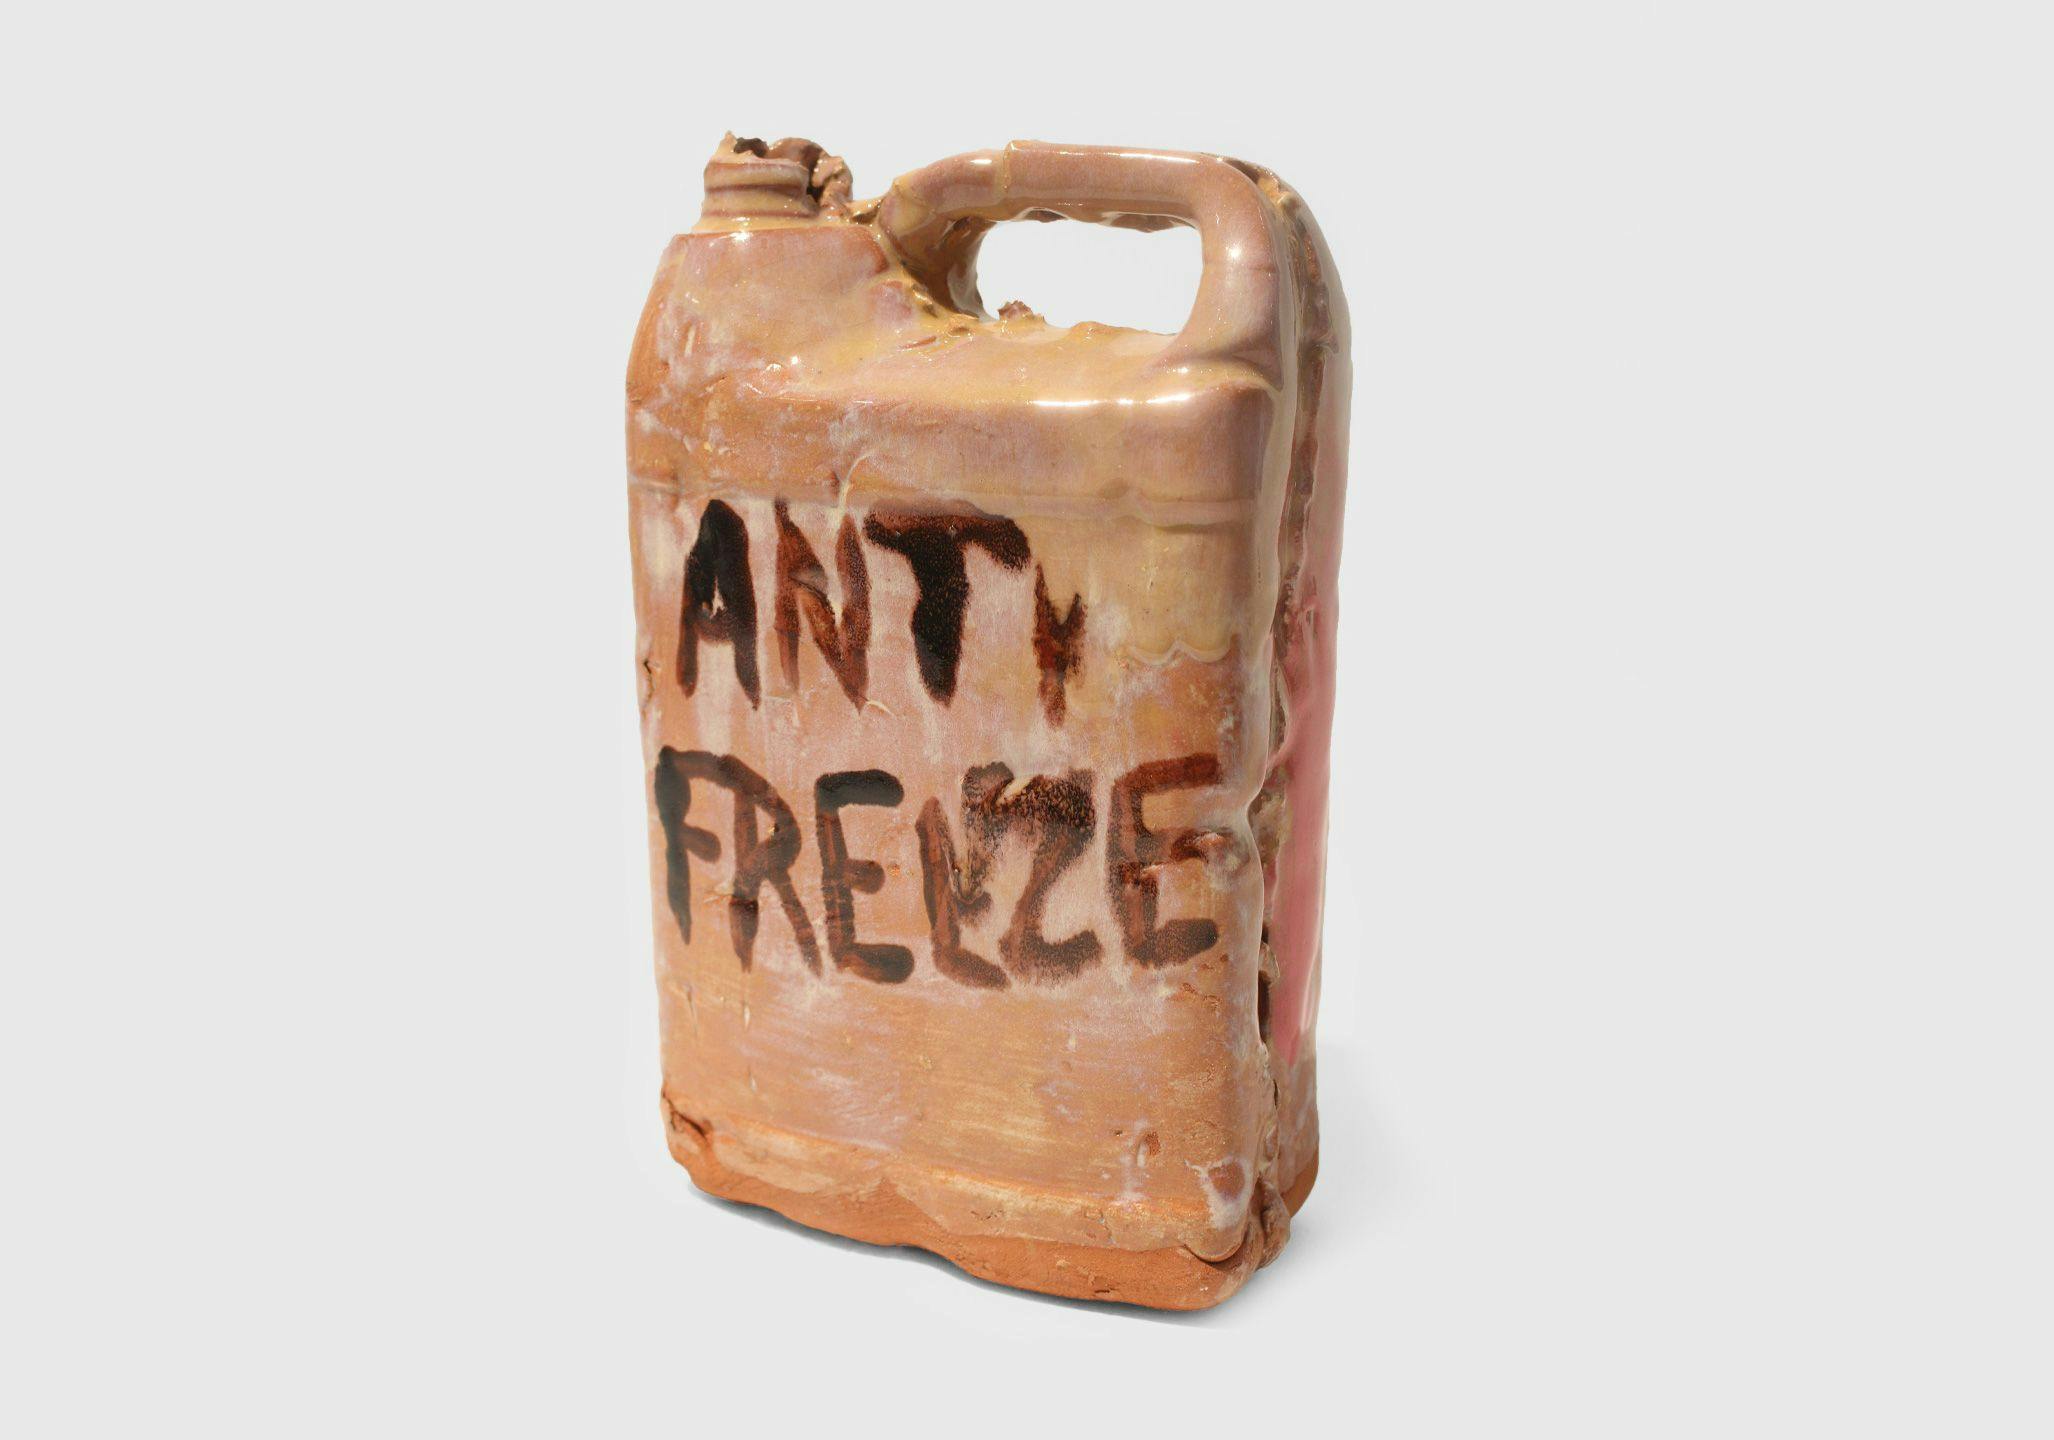 An untitled ceramic sculpture by Josh Smith, dated 2014.